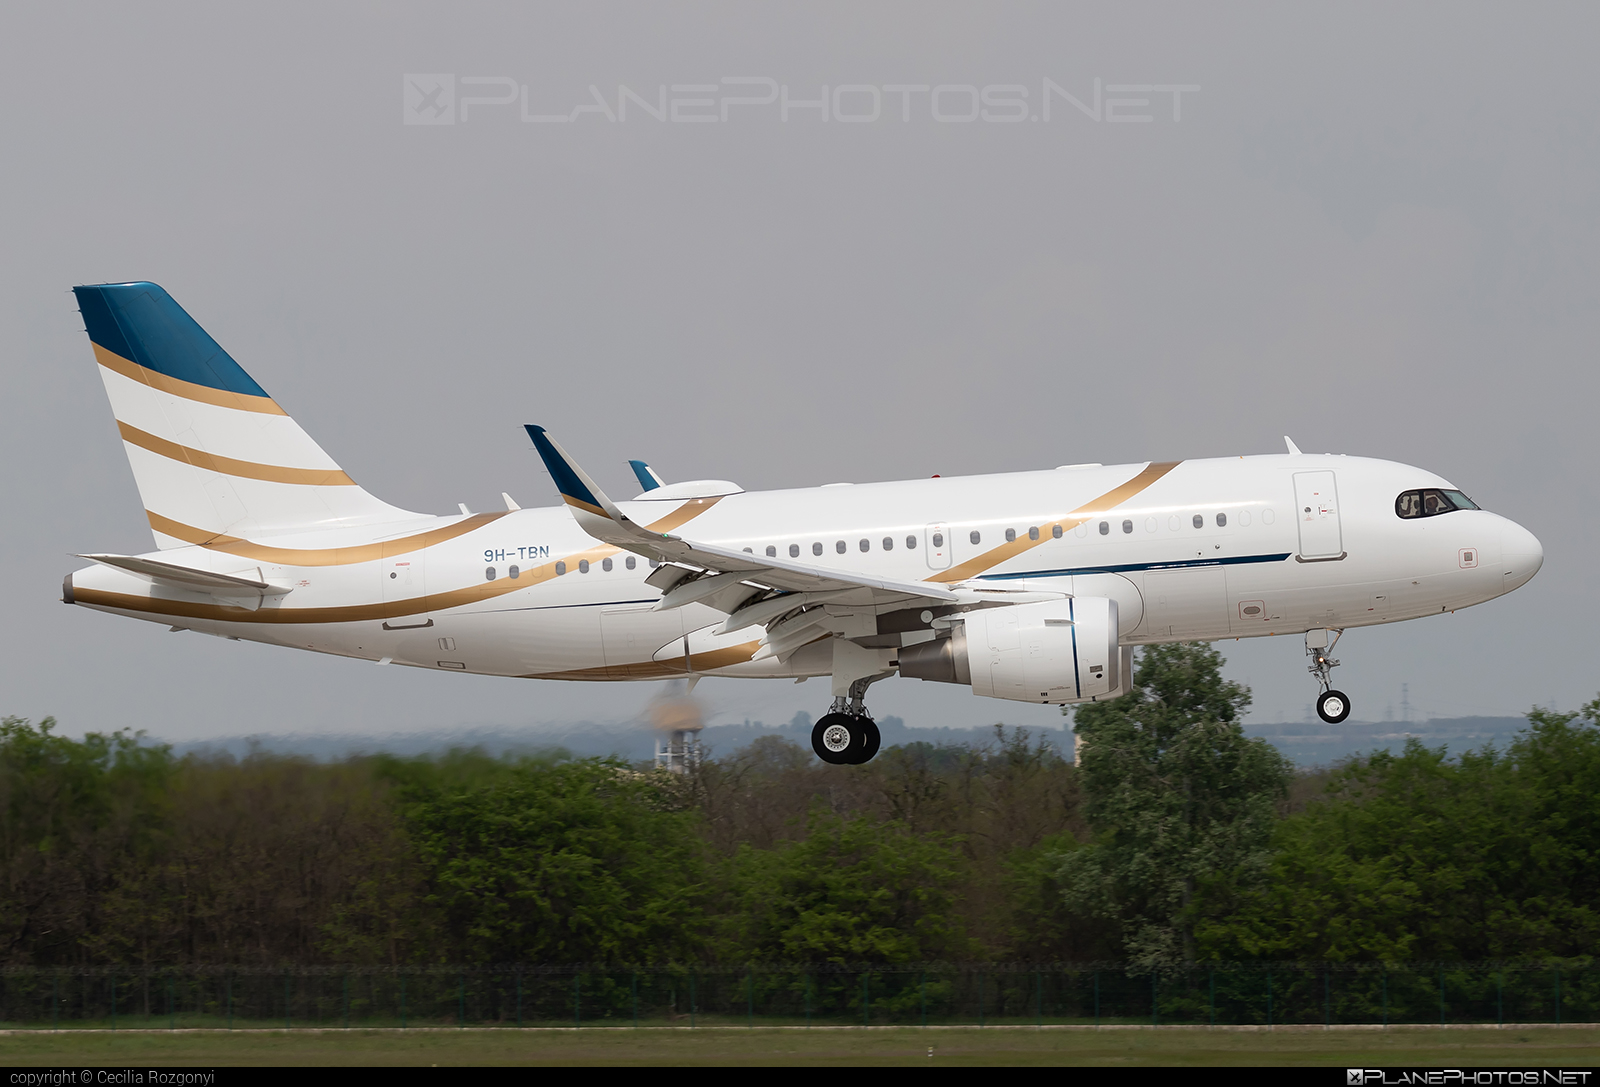 Airbus ACJ319-115X - 9H-TBN operated by Comlux Malta #ComluxAviation #ComluxMalta #acj319 #acj319115x #airbus #airbuscorporatejet #comlux